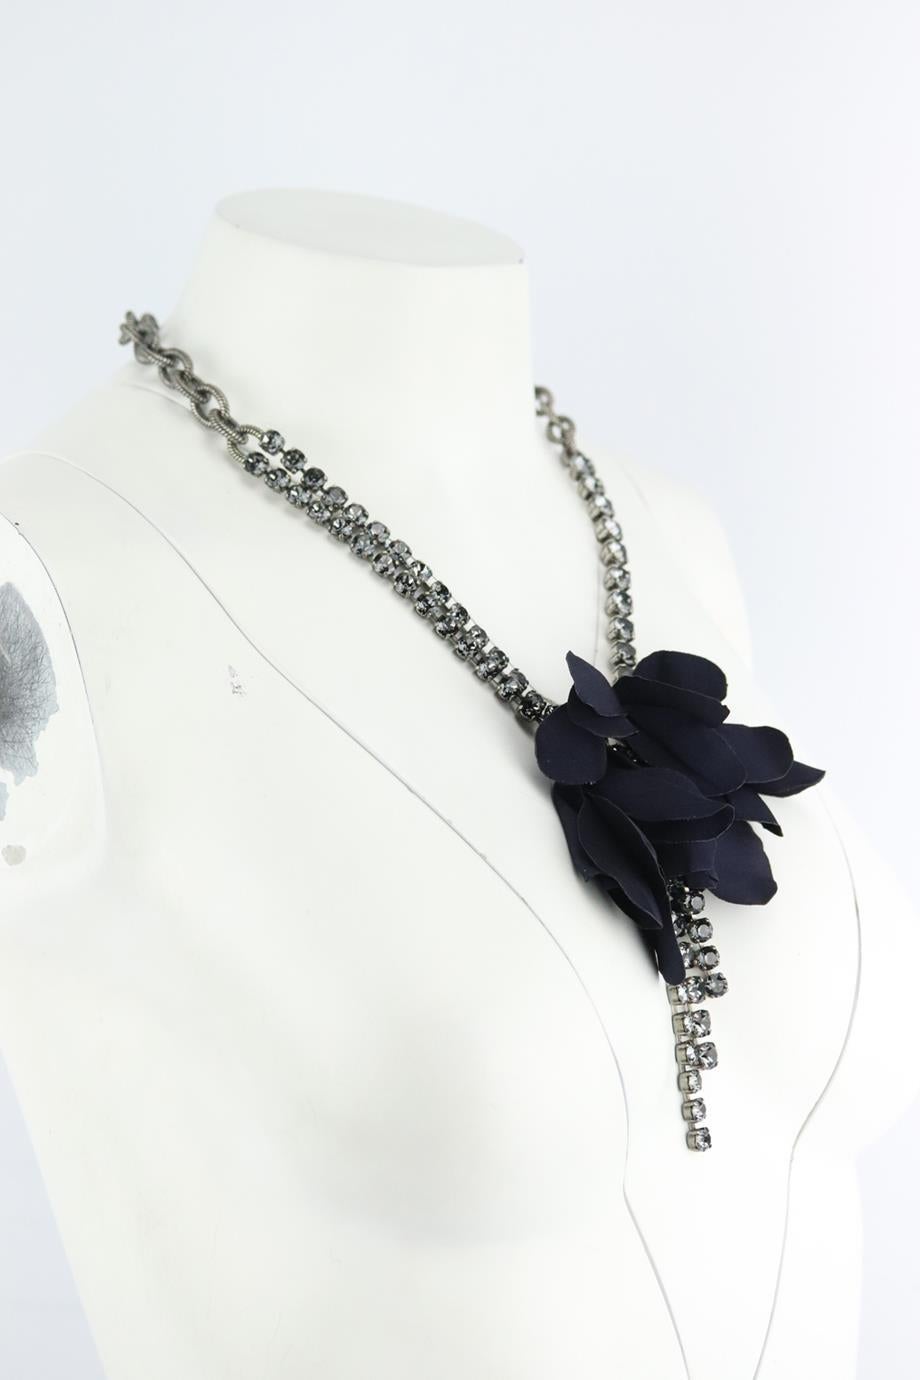 Lanvin silk flower and crystal embellished chain necklace. Made from brass chain with black silk flower and crystal embellishment. Black. Lobster clasp fastening at back. Does not come with dustbag or box. Min. Drop: 7.2 in. Max. Drop: 10.5 in.